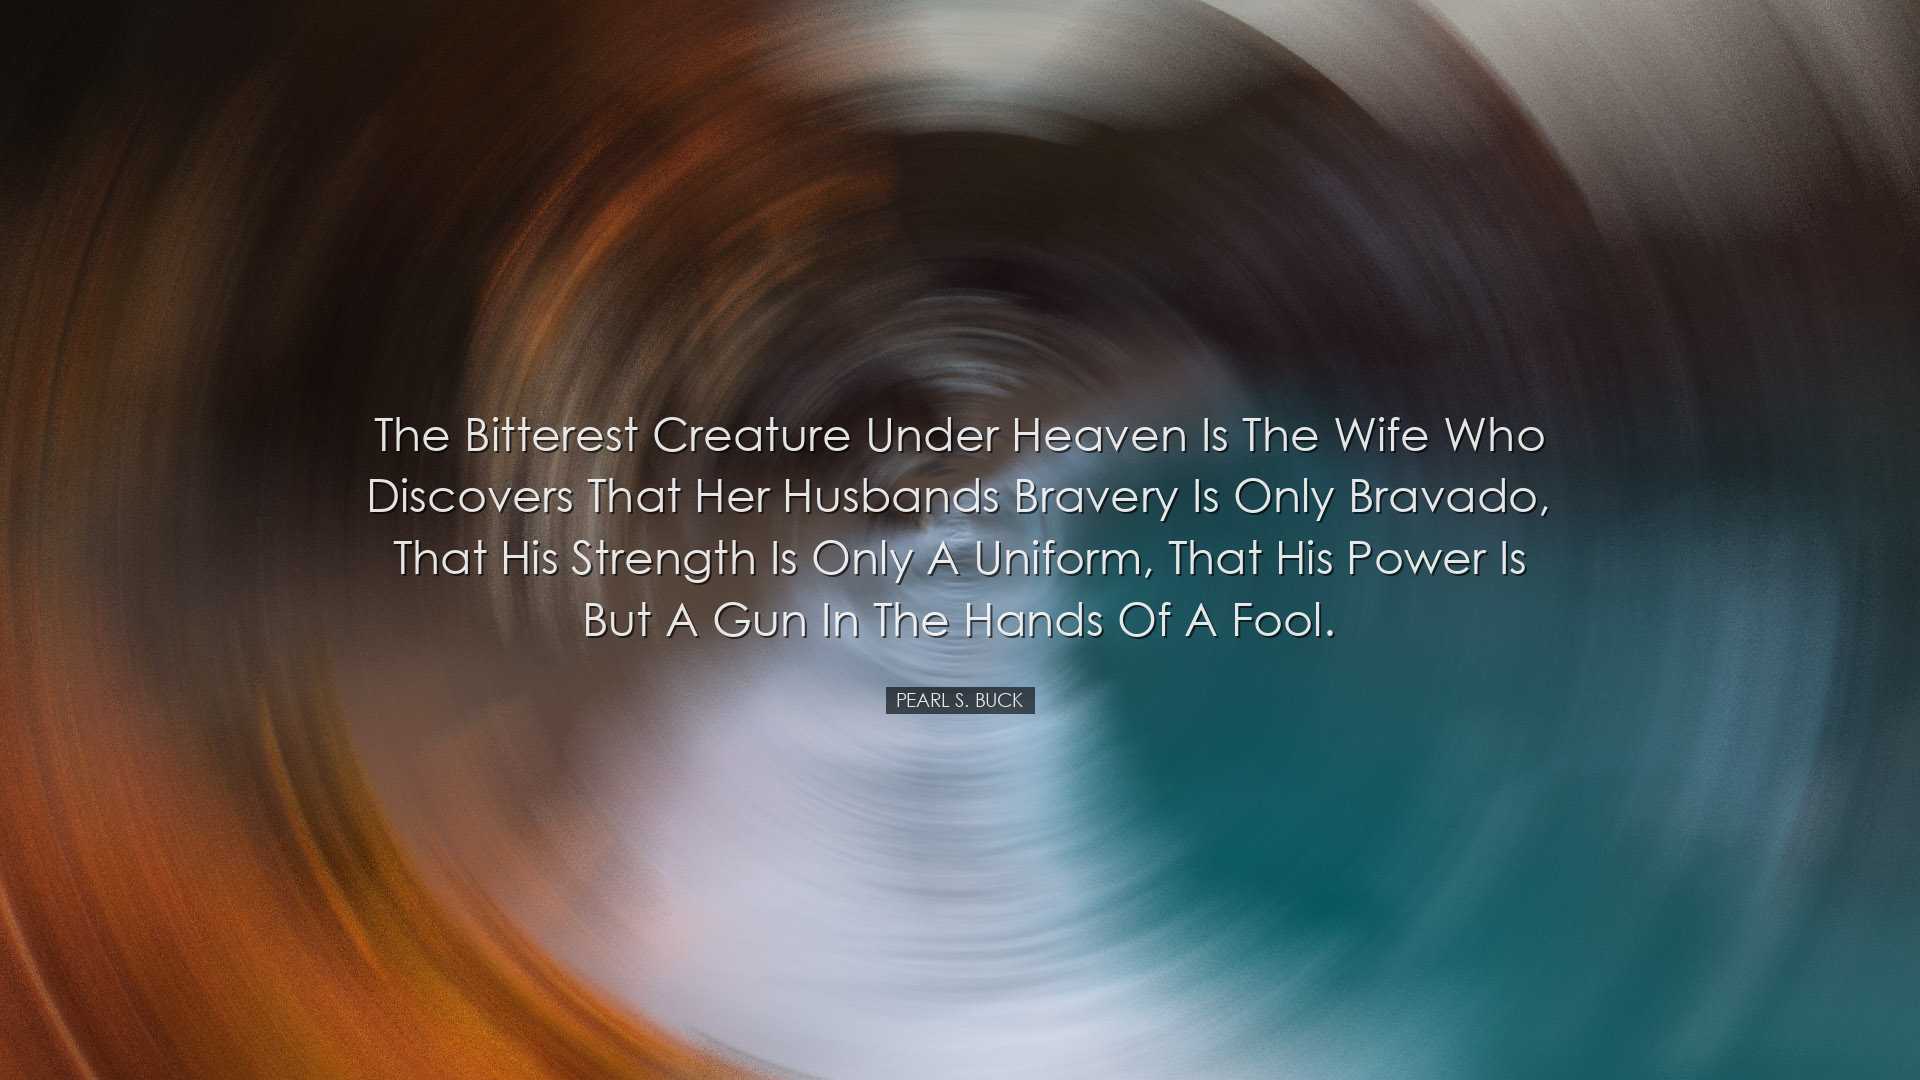 The bitterest creature under heaven is the wife who discovers that